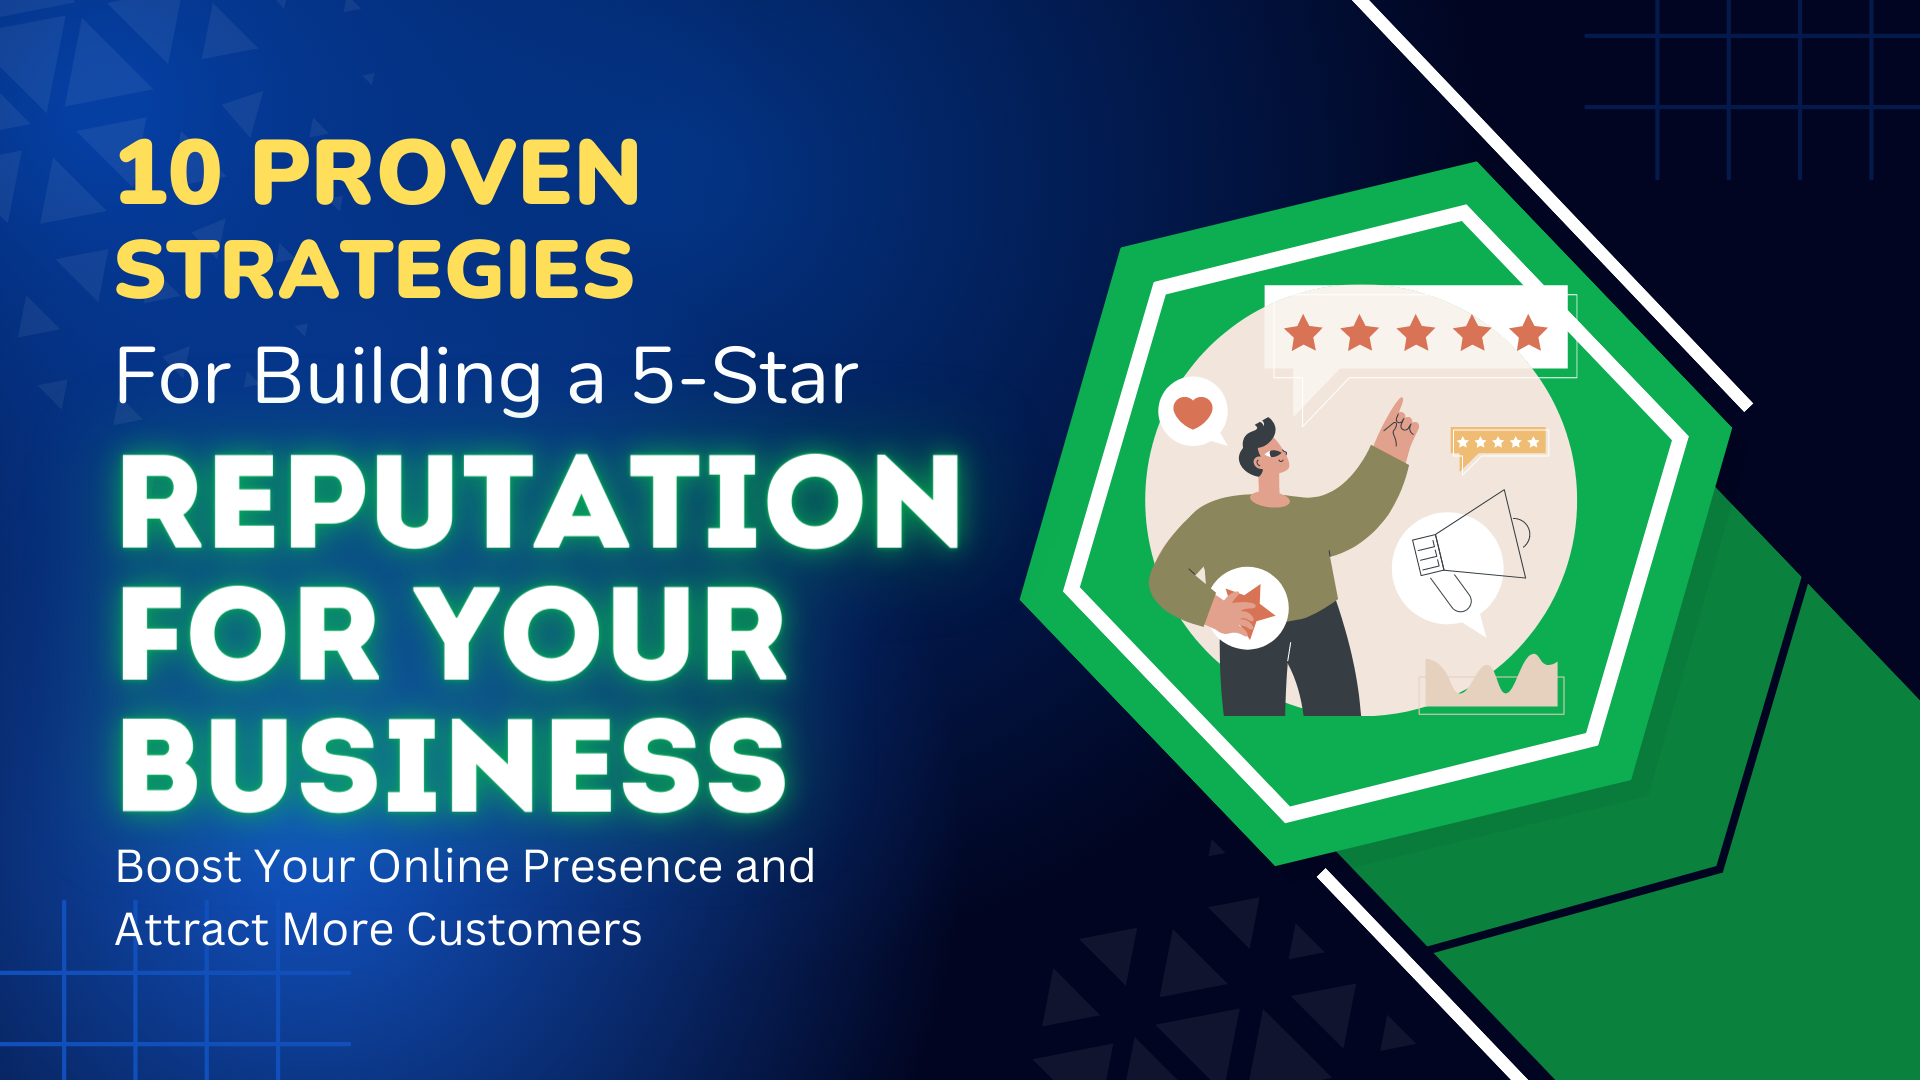 10 Proven Strategies for Building a 5-Star Reputation for Your Business